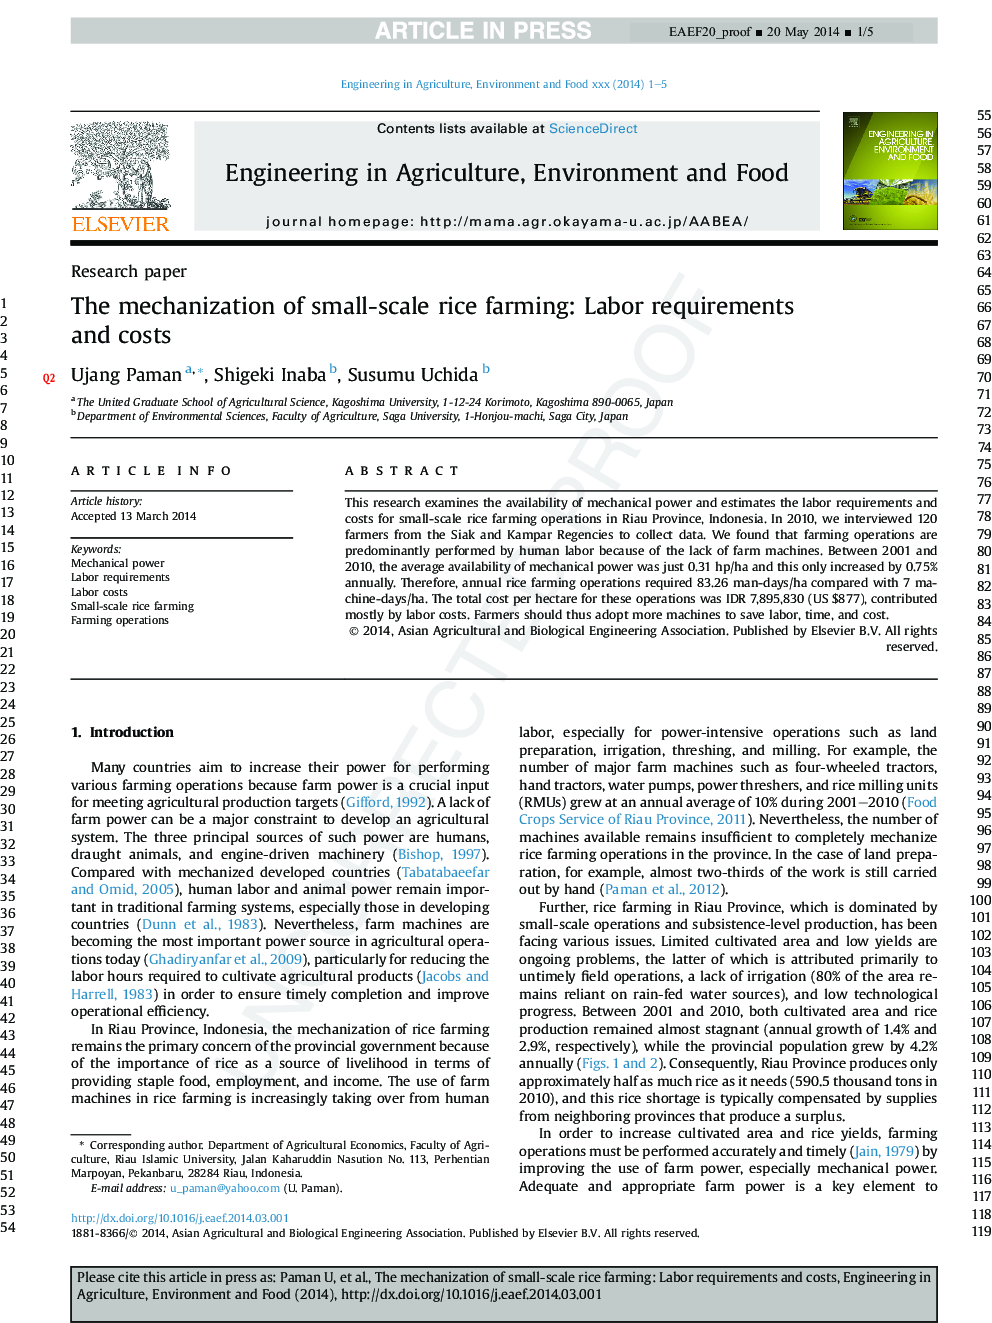 The mechanization of small-scale rice farming: Labor requirements and costs